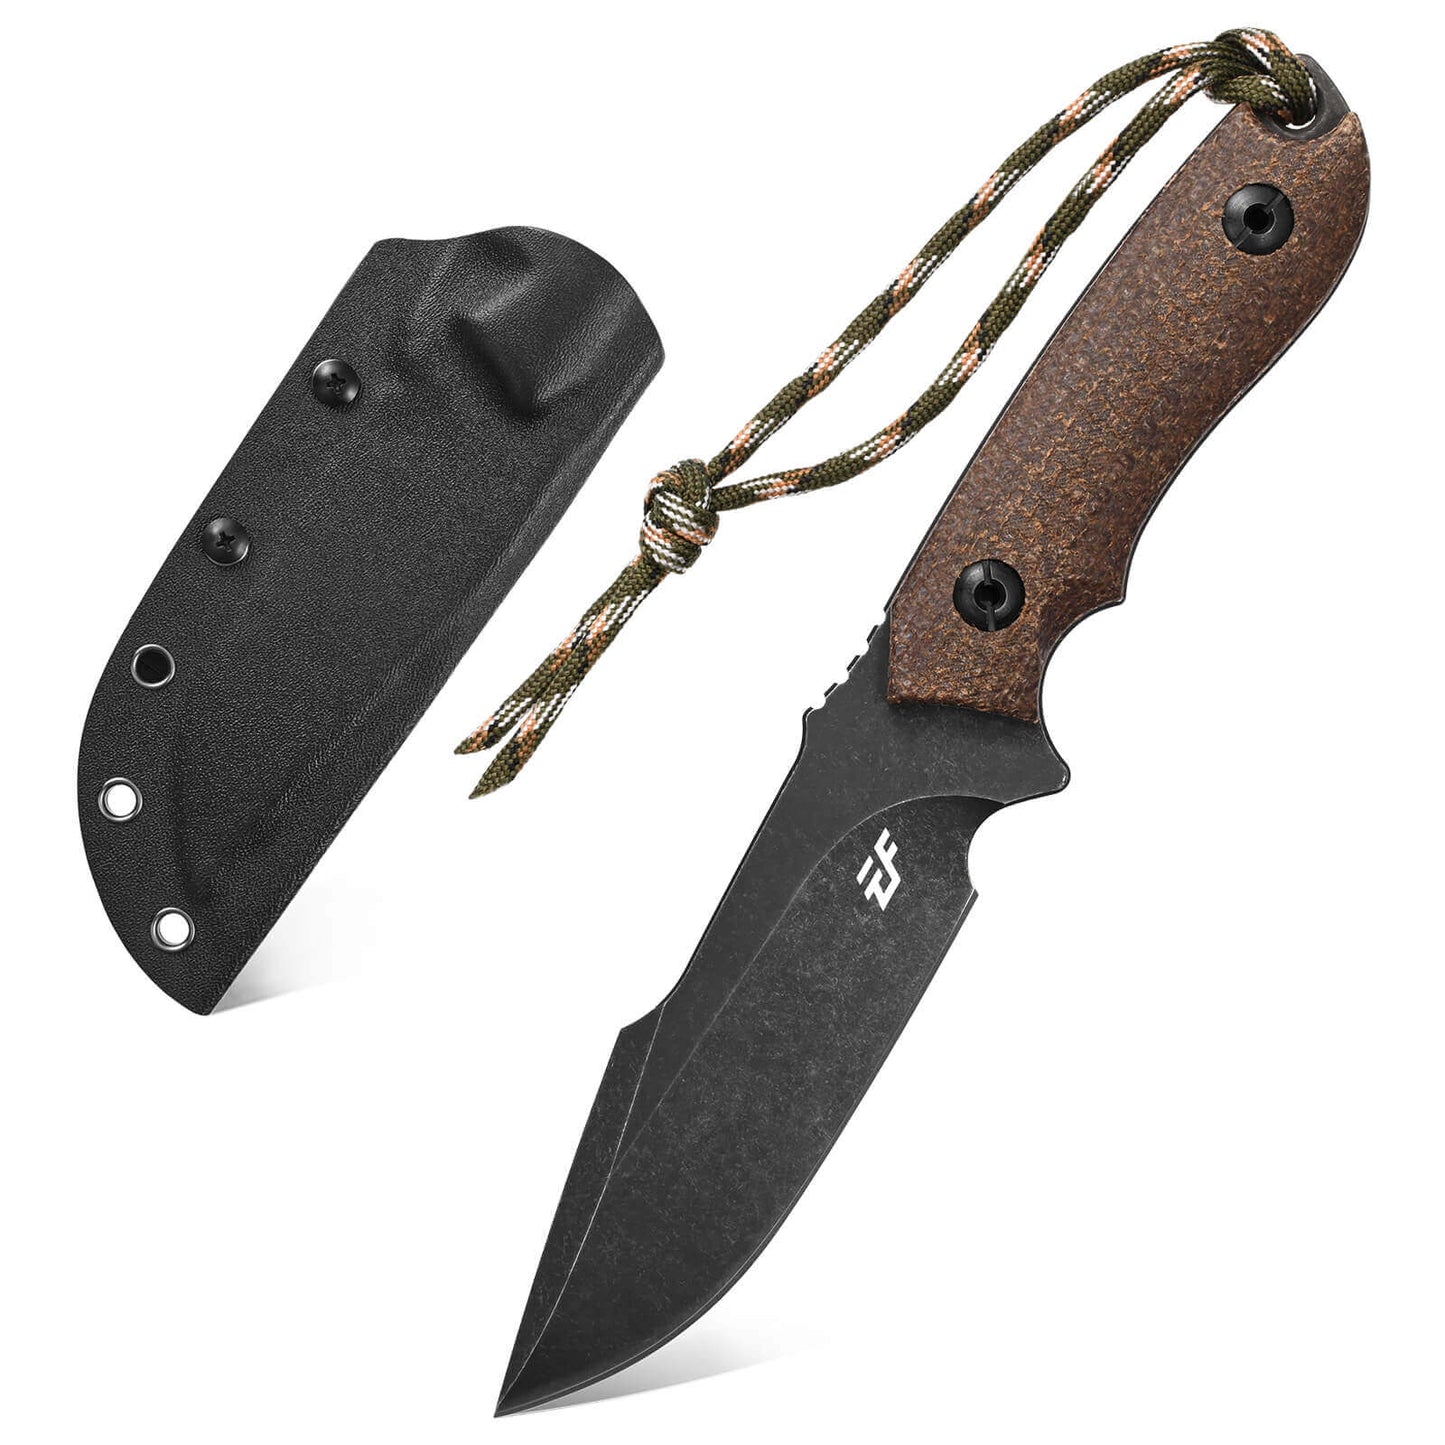 Eafengrow EF130 Fixed Blade Knife EDC Fixed Knives